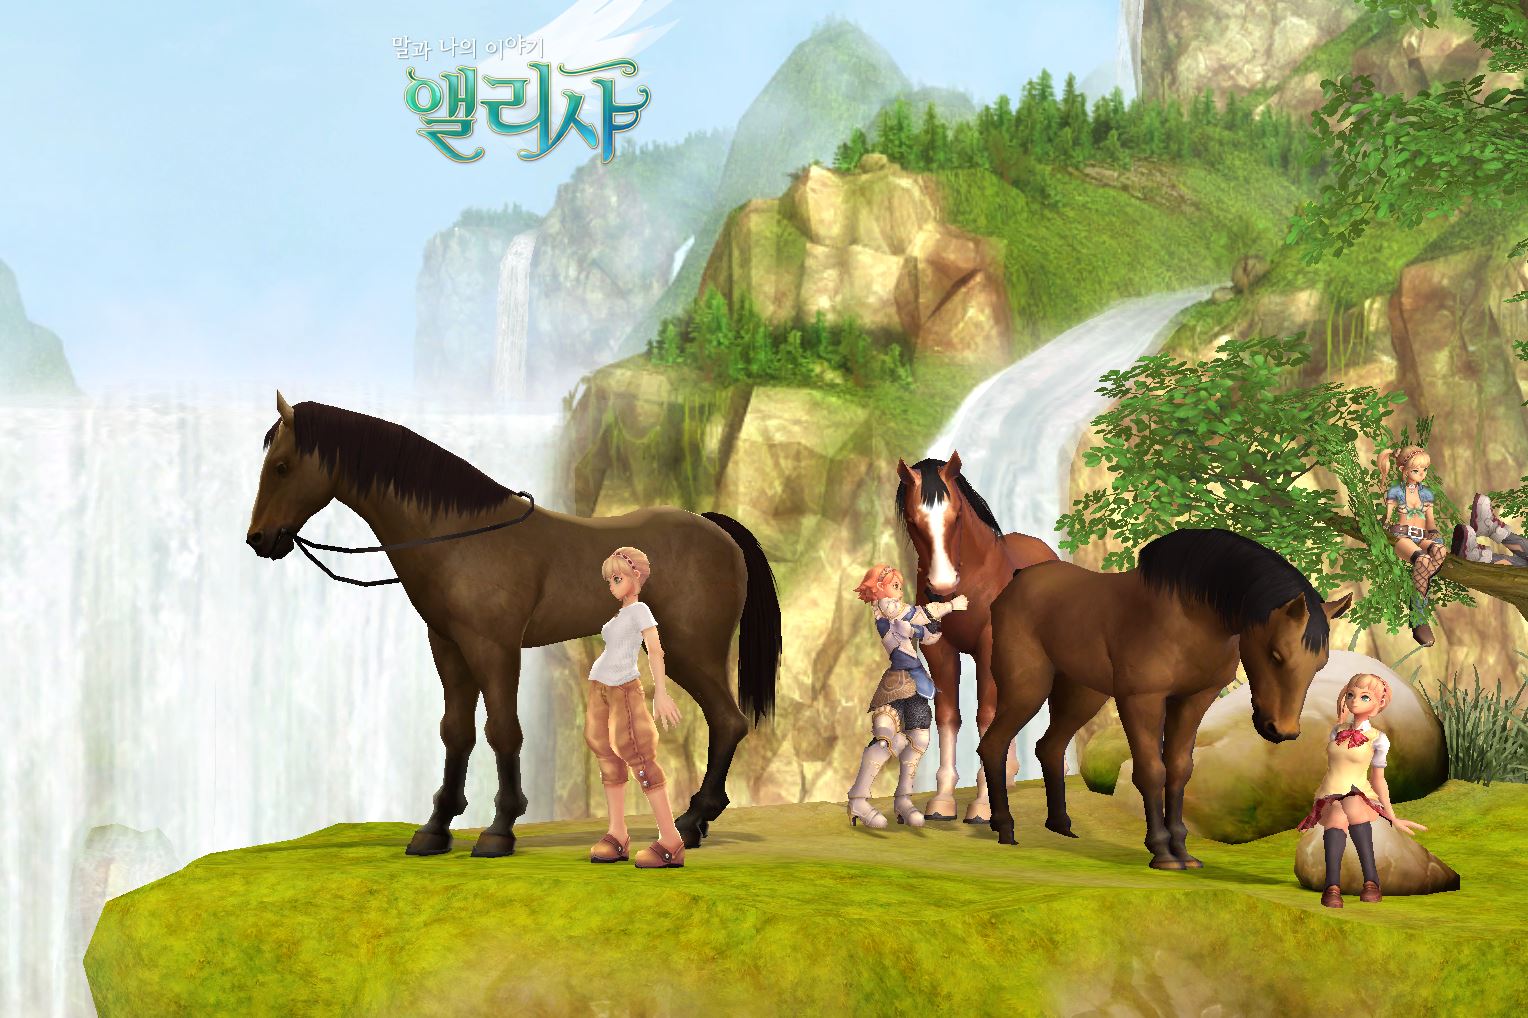 Star Stable - Horse Games Online